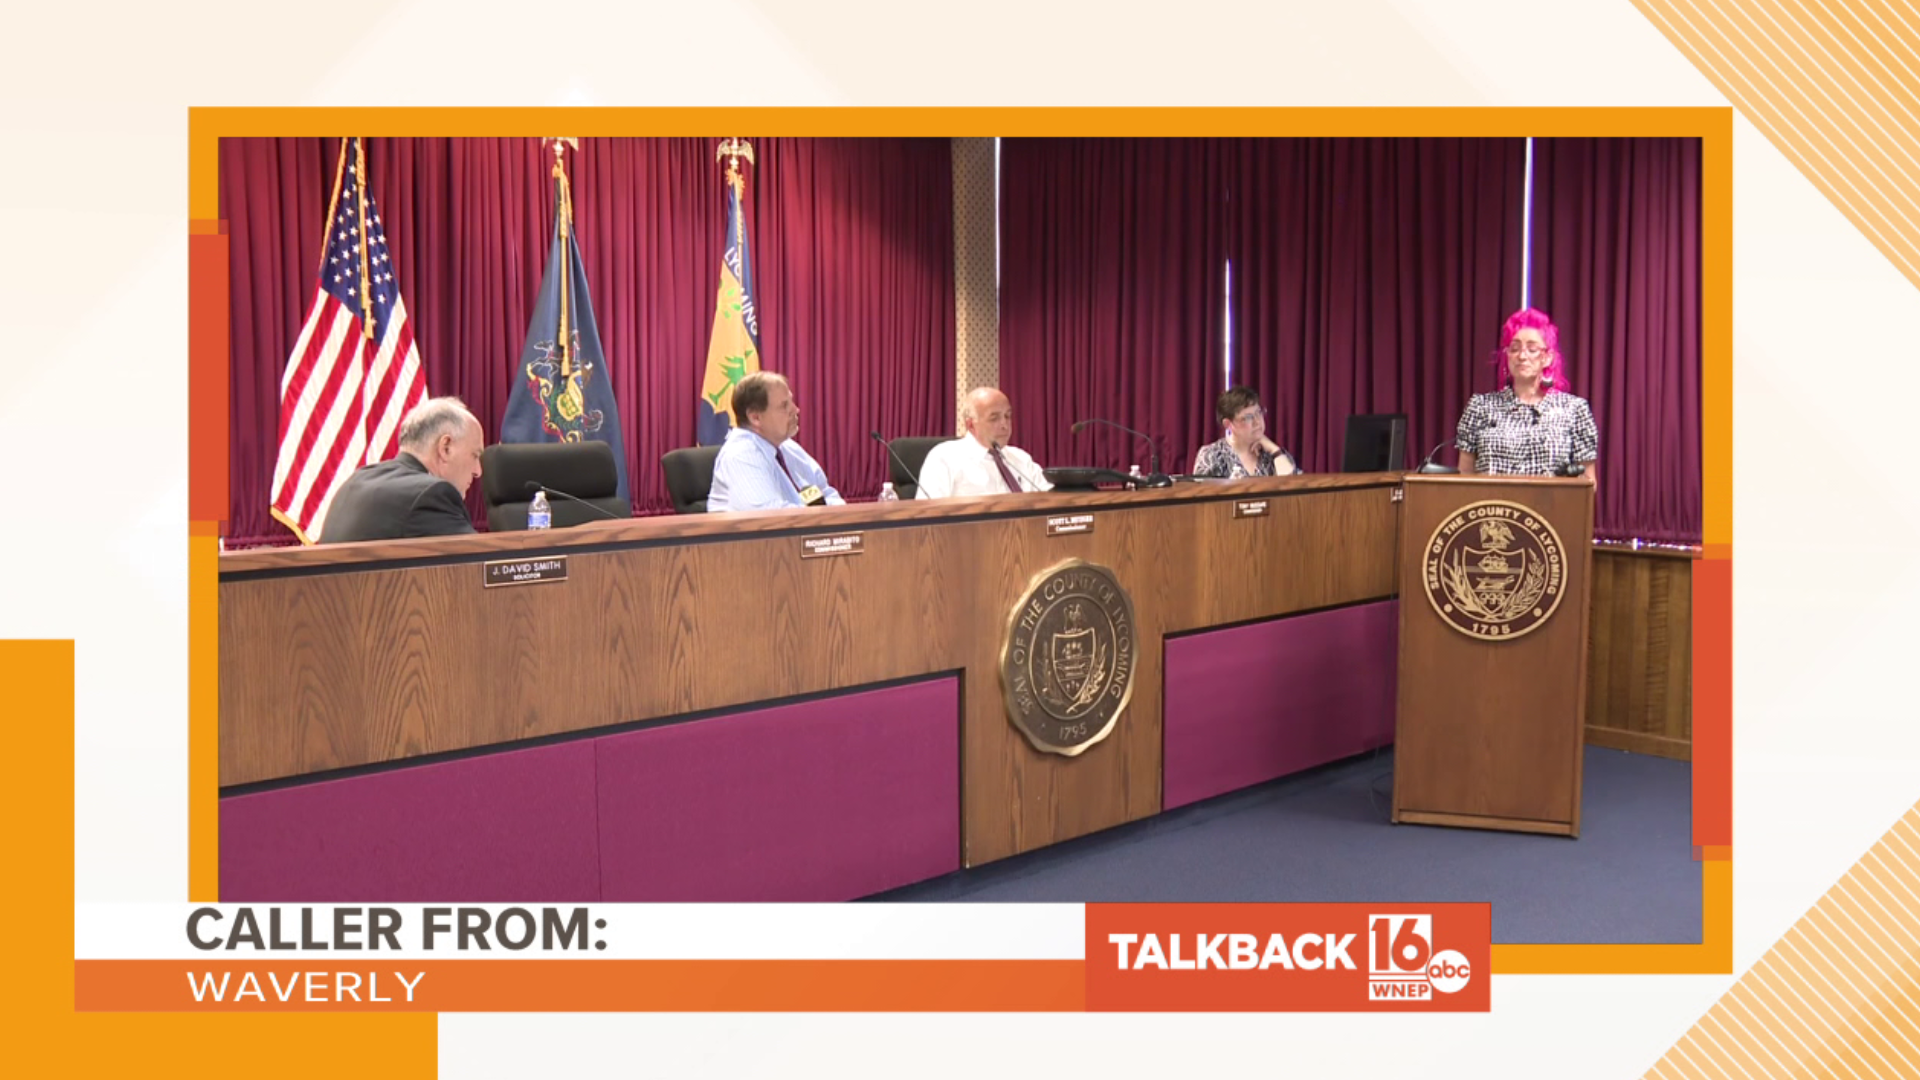 Some Talkbackers have a few choice words for two local Commissioners who want to take down a display at a public library celebrating Pride Month.